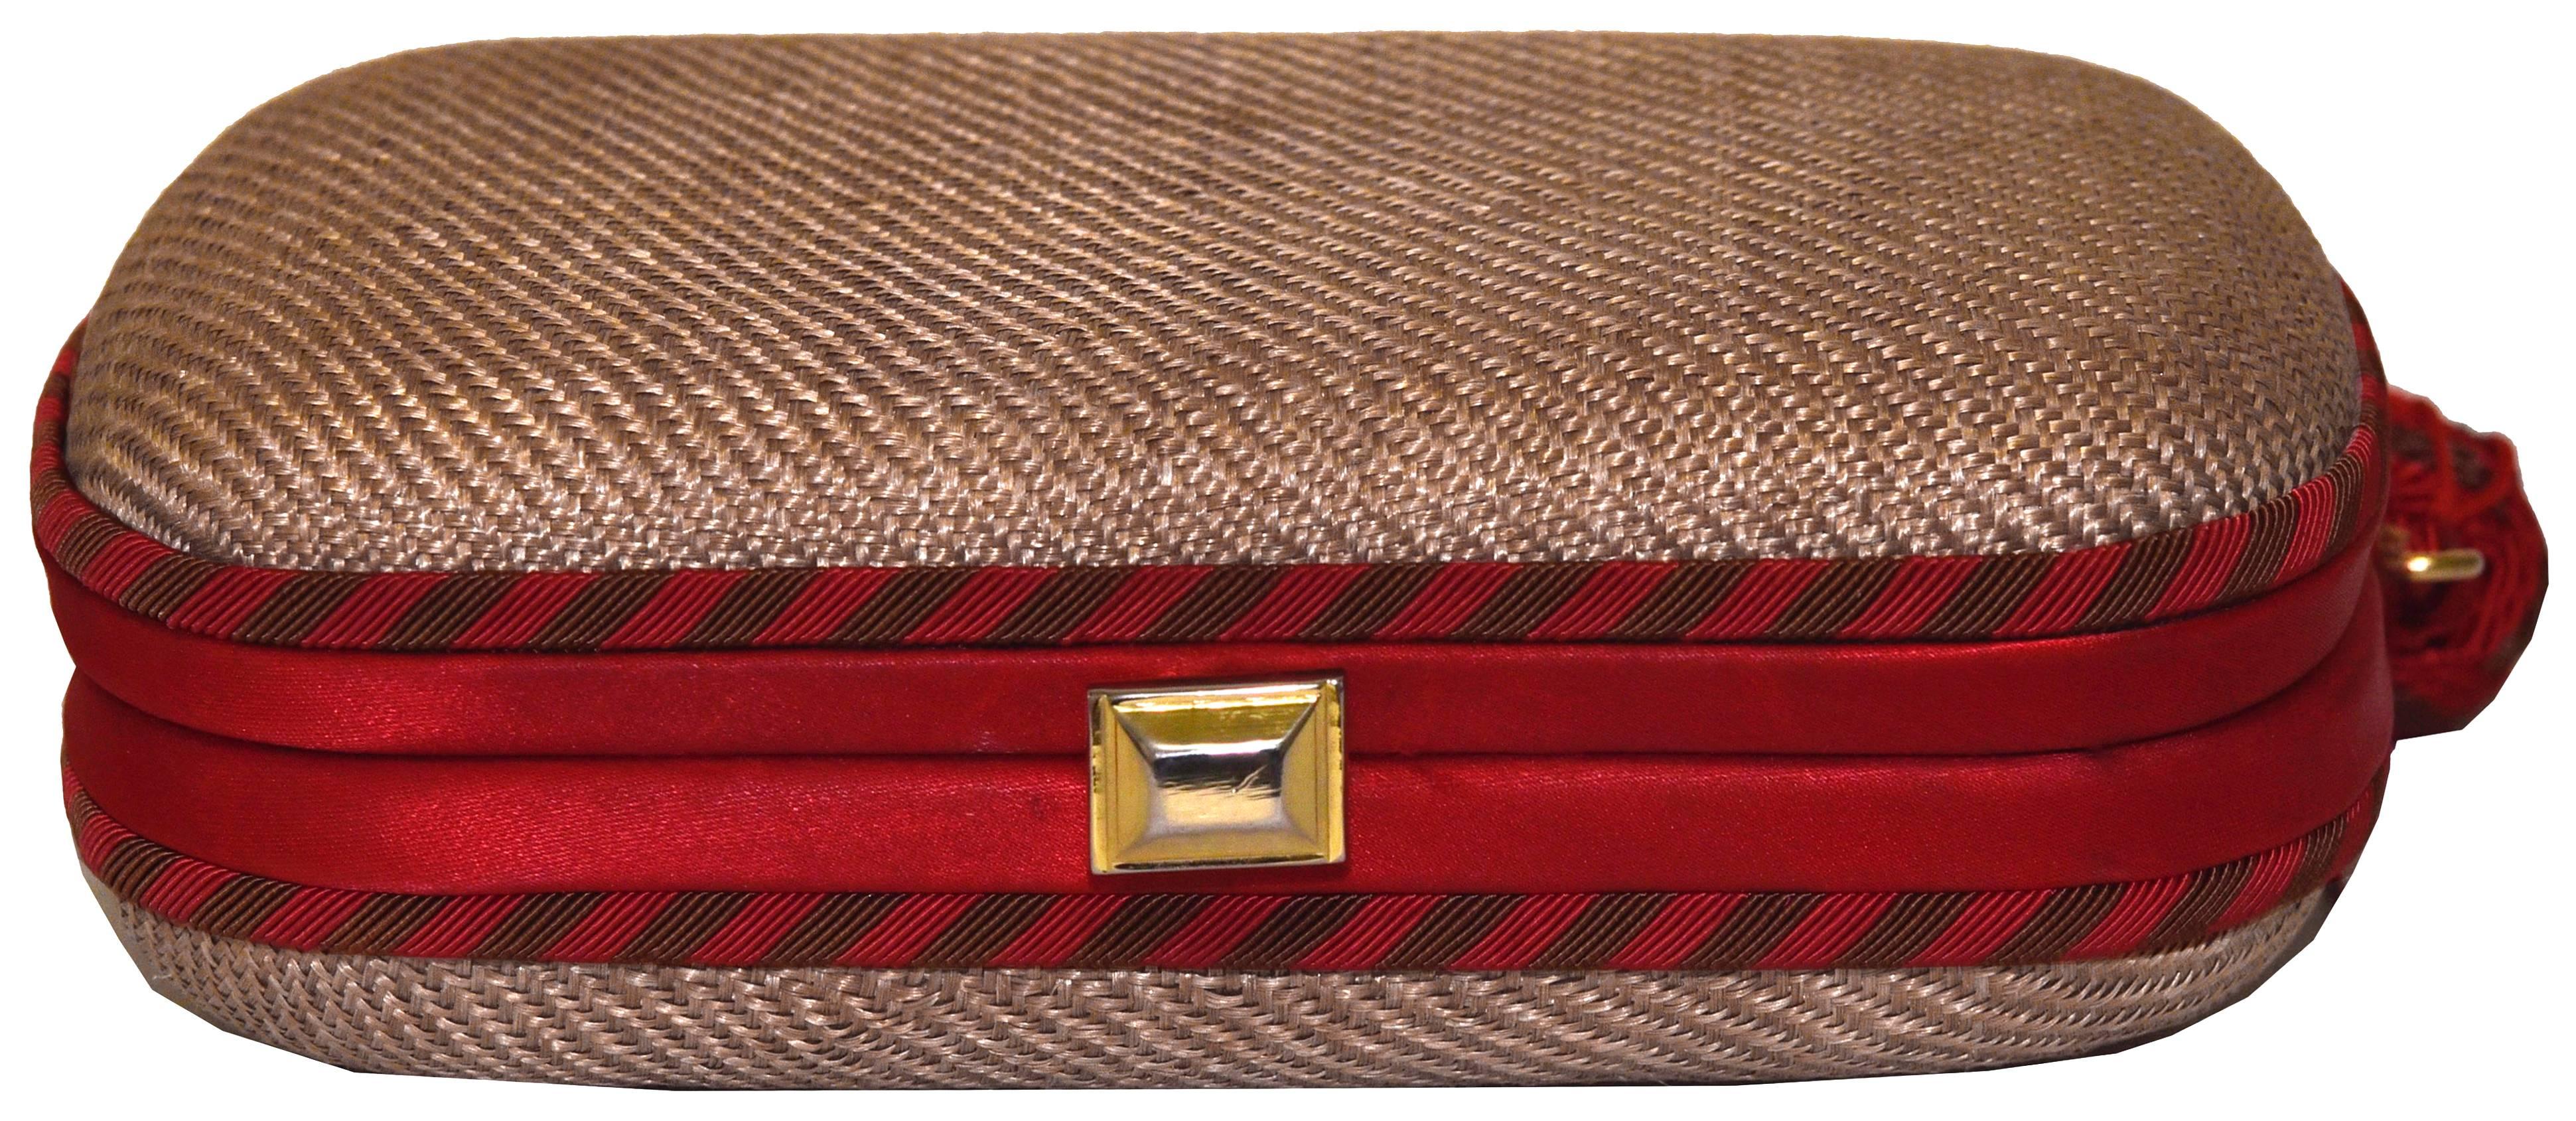 Gorgeous tan Bottega Knot bag with orangy red and black border.  Stunning and in excellent condition. A rare find.